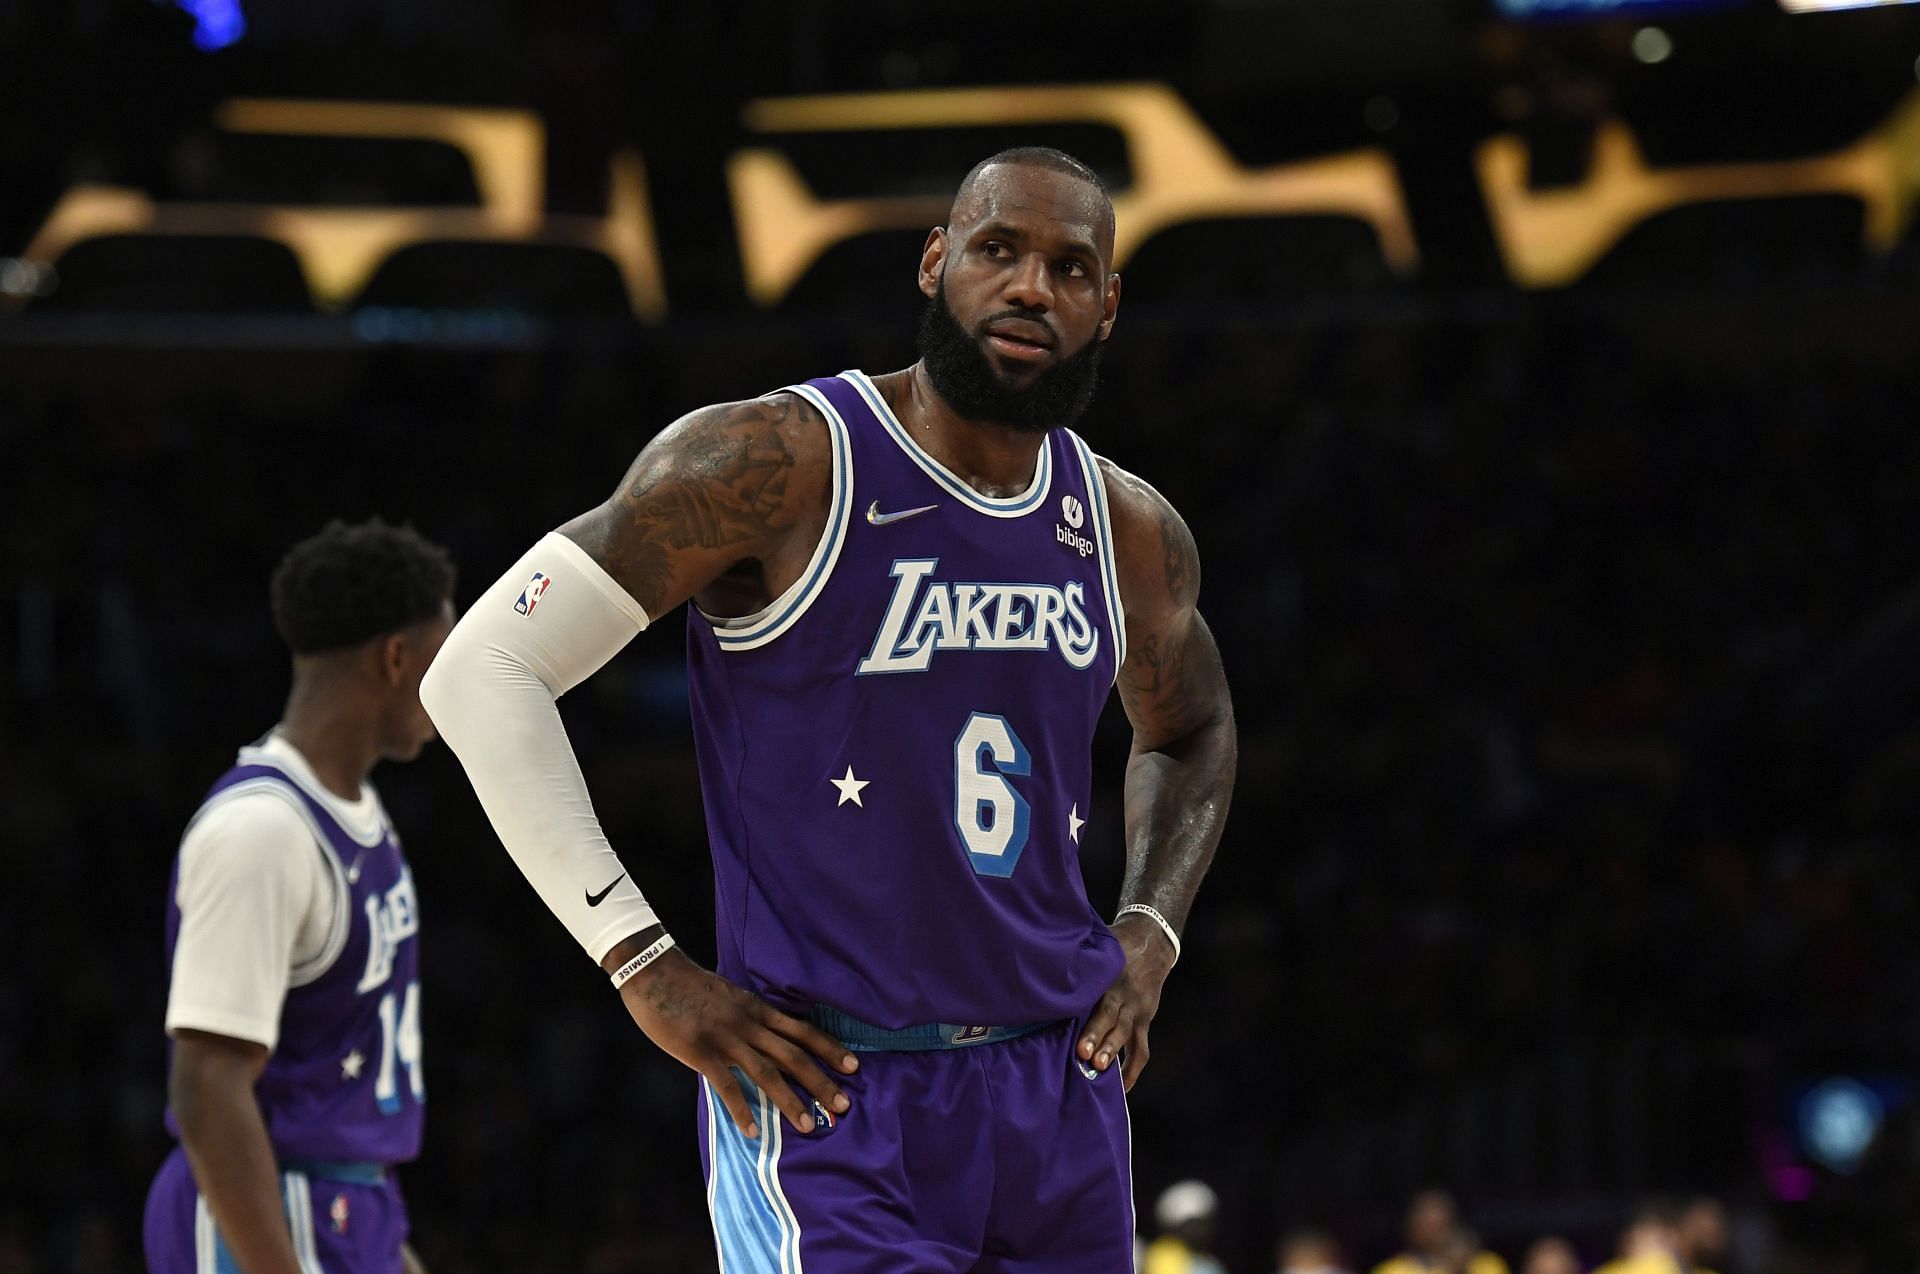 LeBron James could be an owner of an NBA team once he retires. [Image Credit: Getty Images]